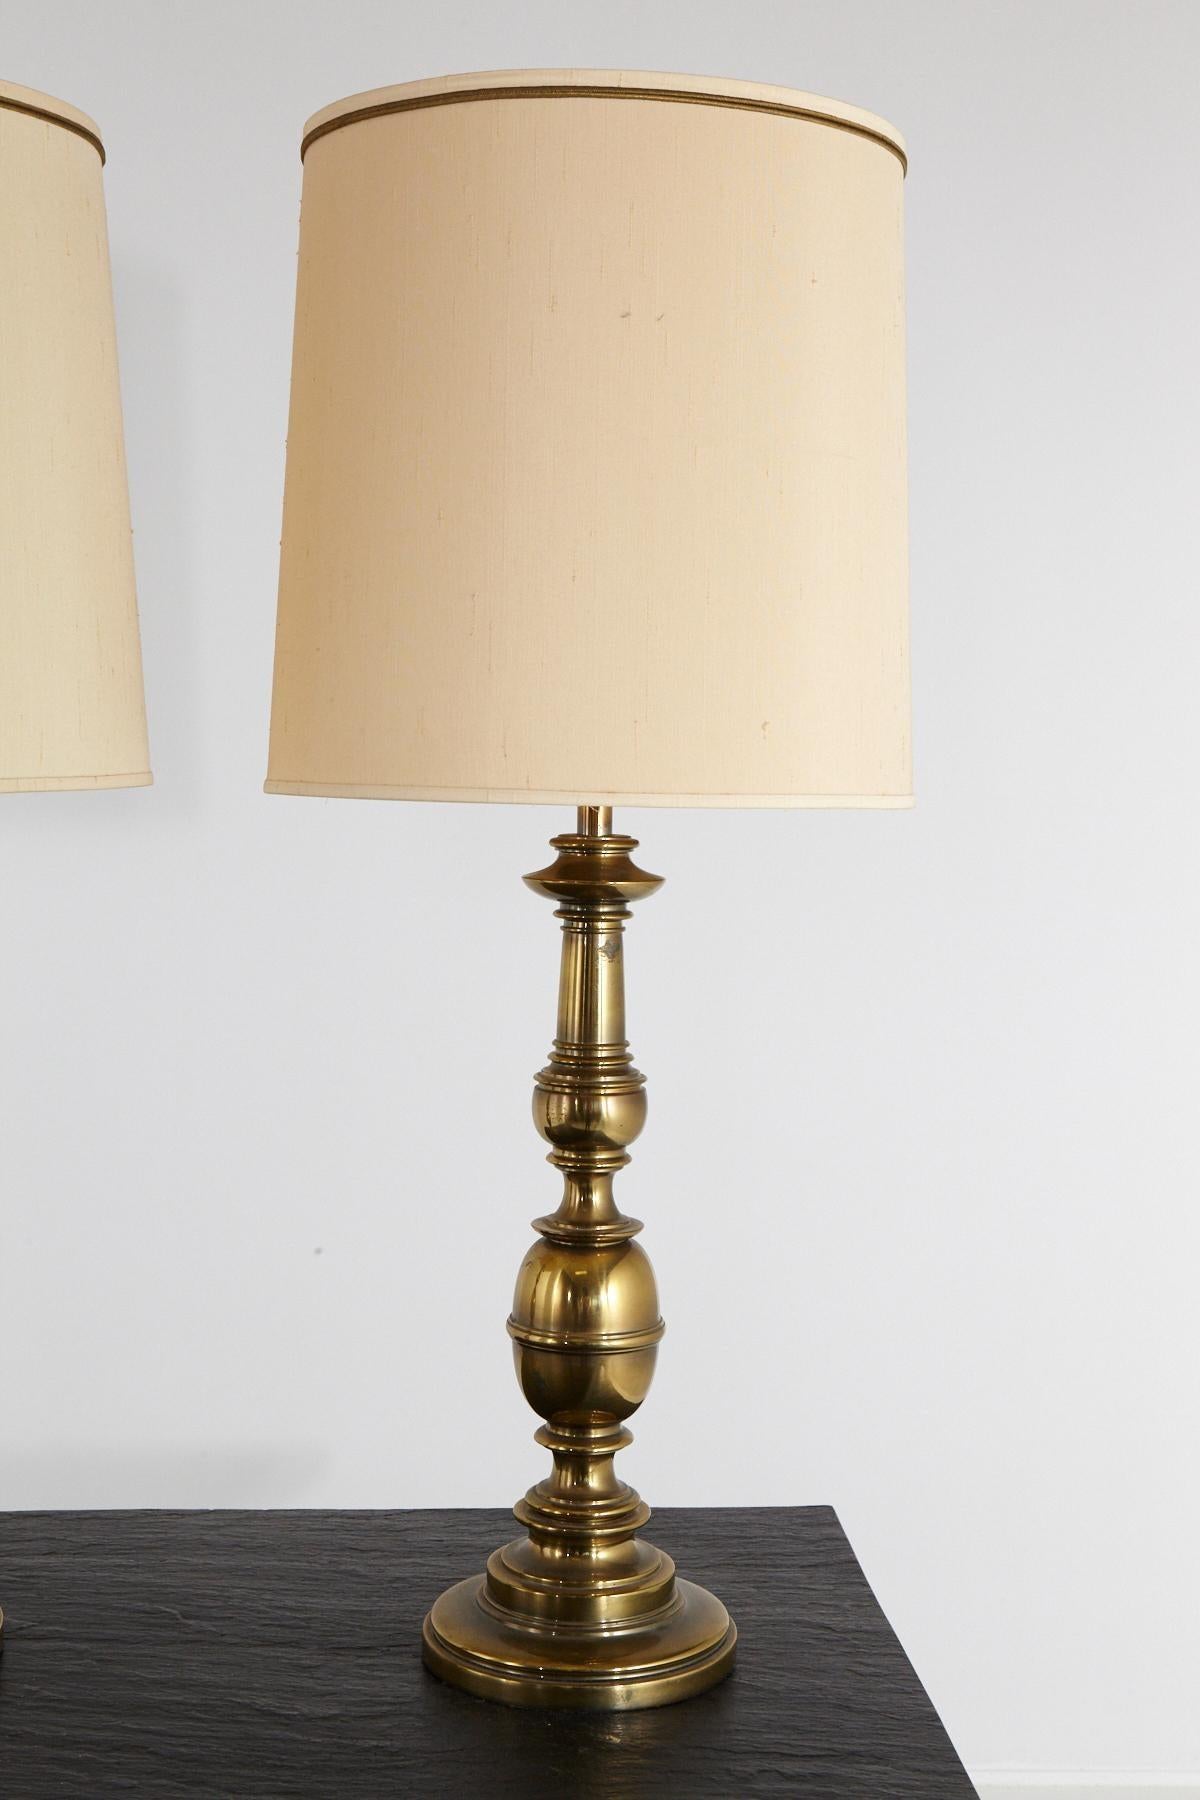 American Pair of Traditional Stiffel Brass Table Lamps with Original Shades, 1950s-1960s